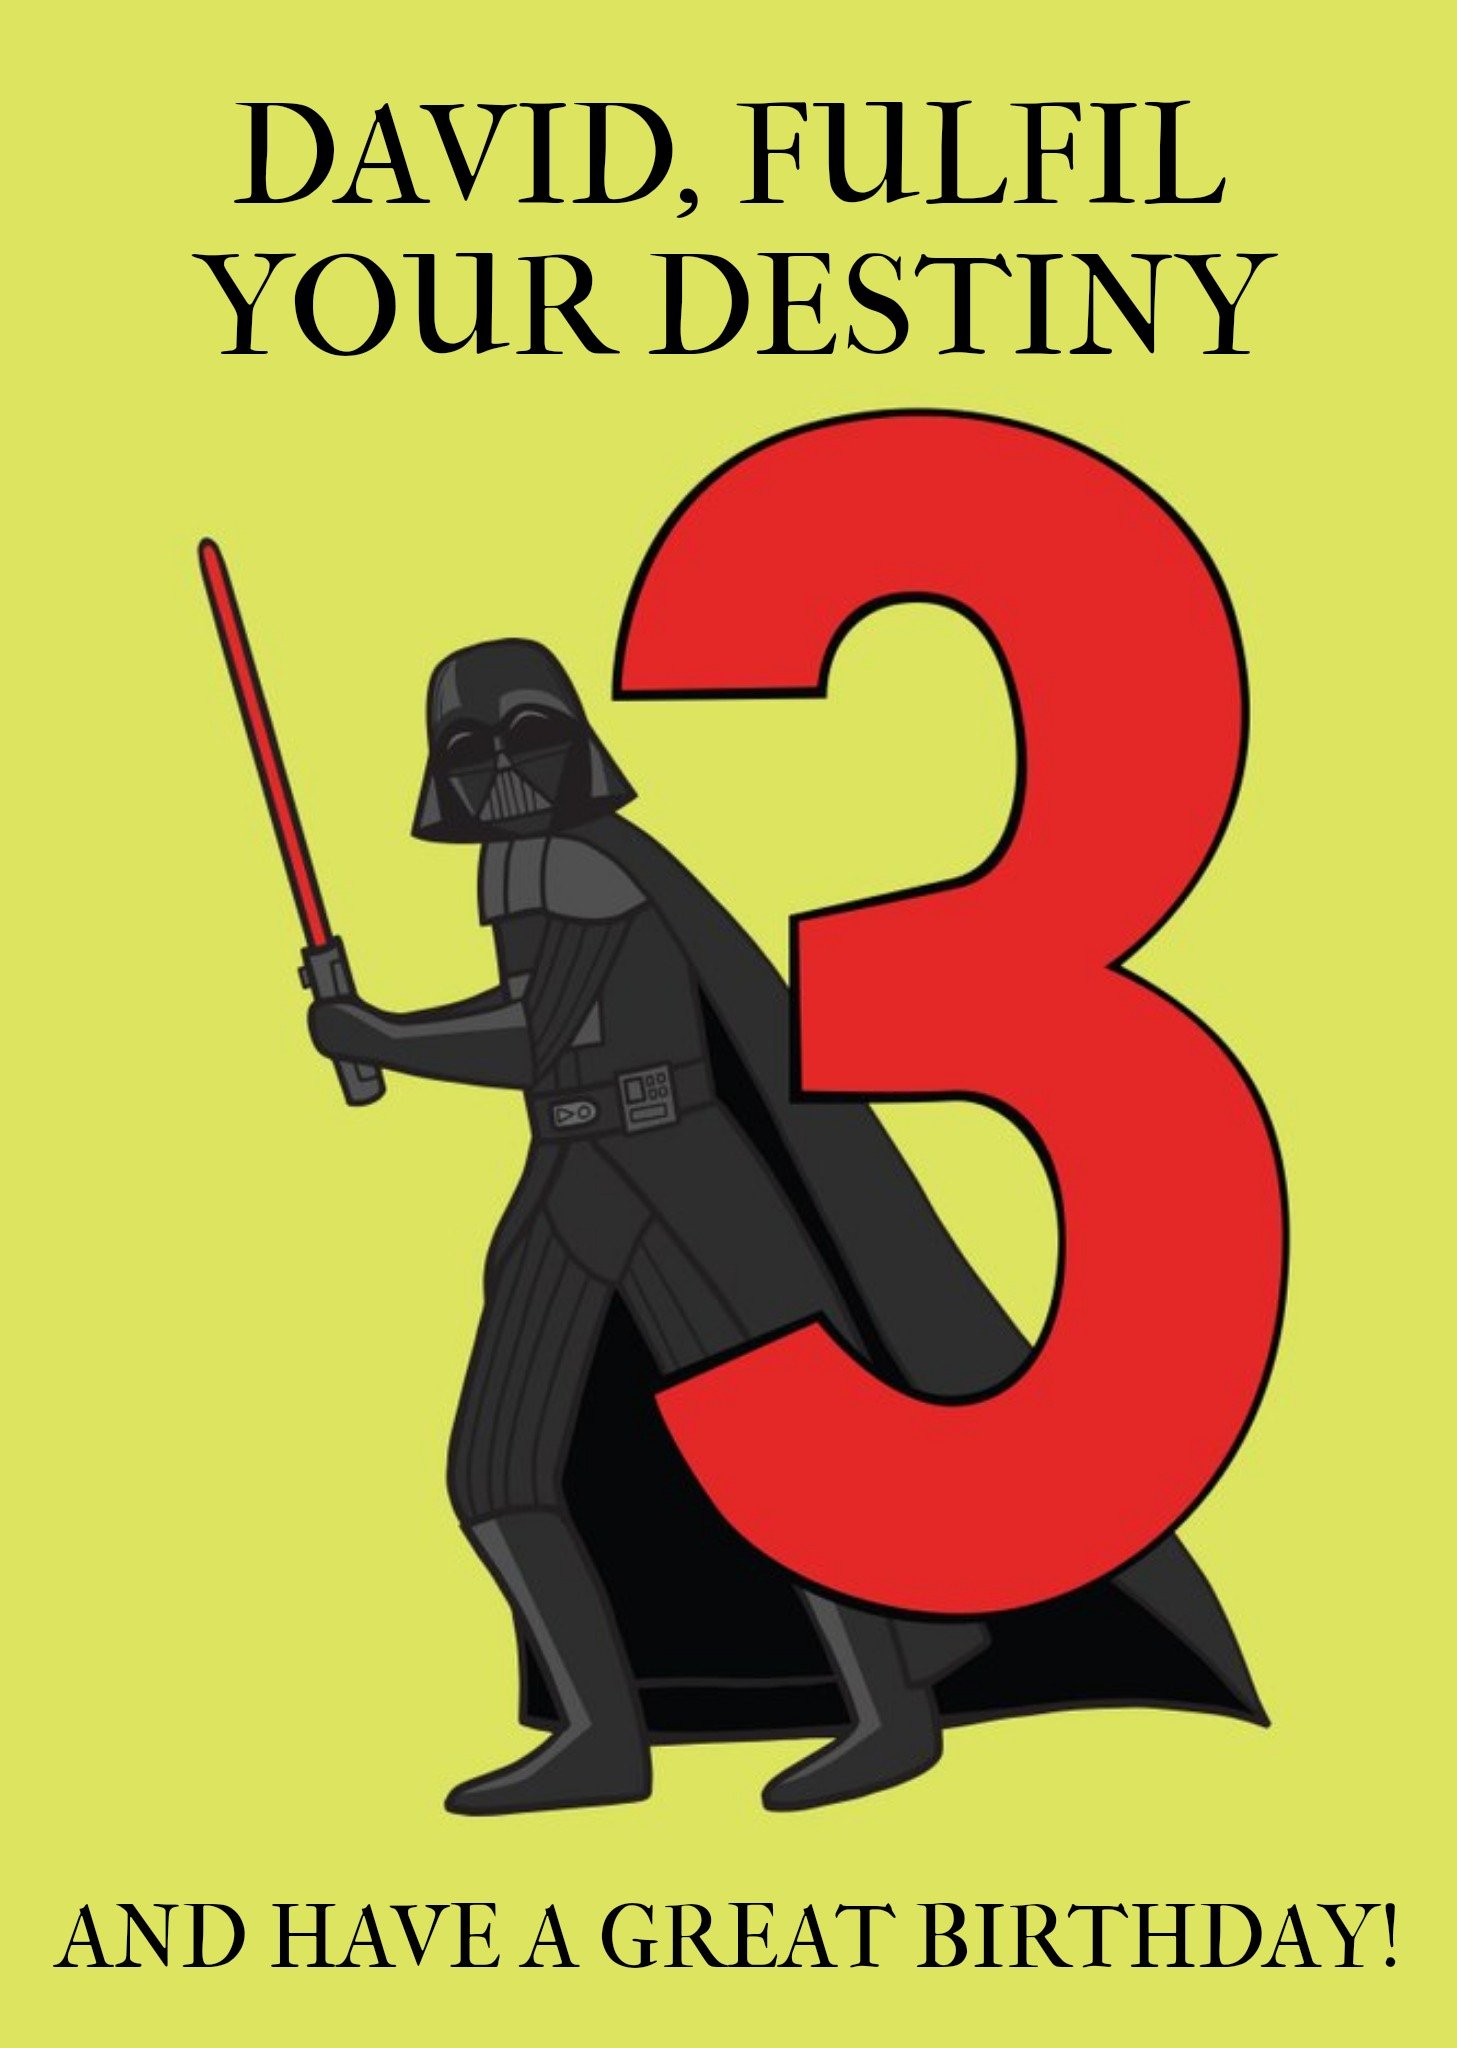 Disney Star Wars Fulfil Your Destiny And Have A Great Birthday Card Ecard